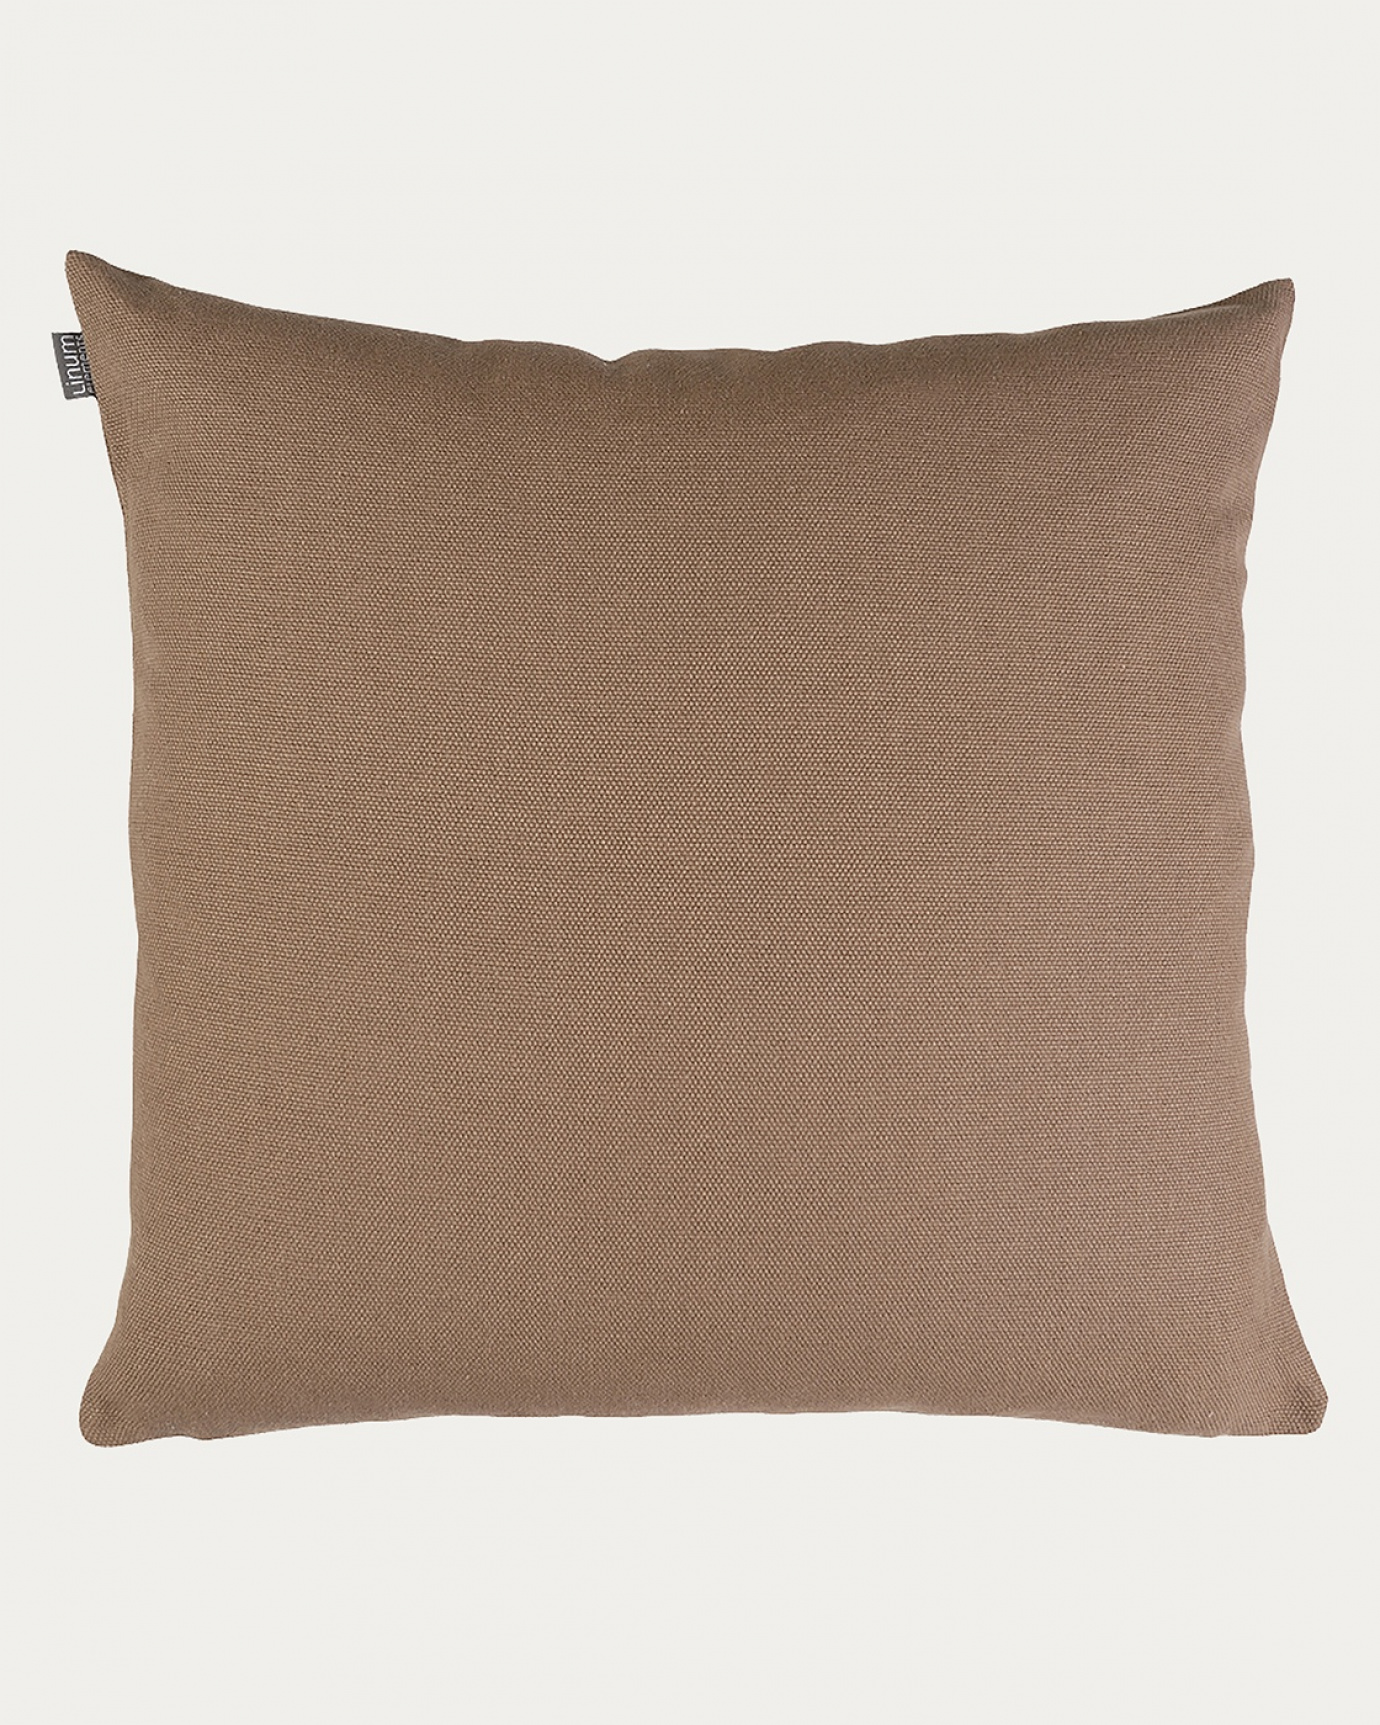 Product image dark mole brown PEPPER cushion cover made of soft cotton from LINUM DESIGN. Easy to wash and durable for generations. Size 60x60 cm.